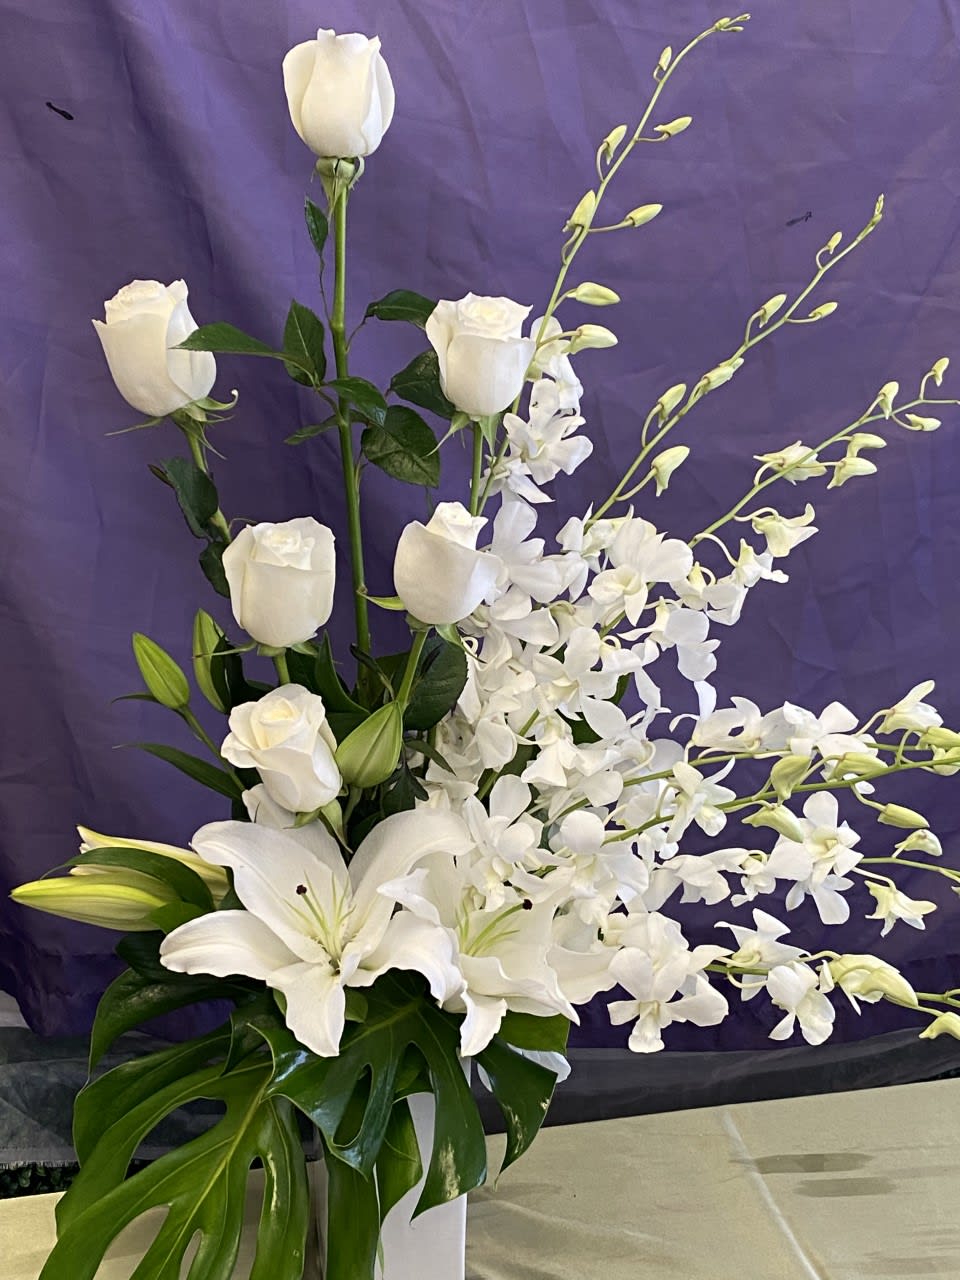 This one sided arrangement contains white Roses, Lilies, and Orchids. This arrangement